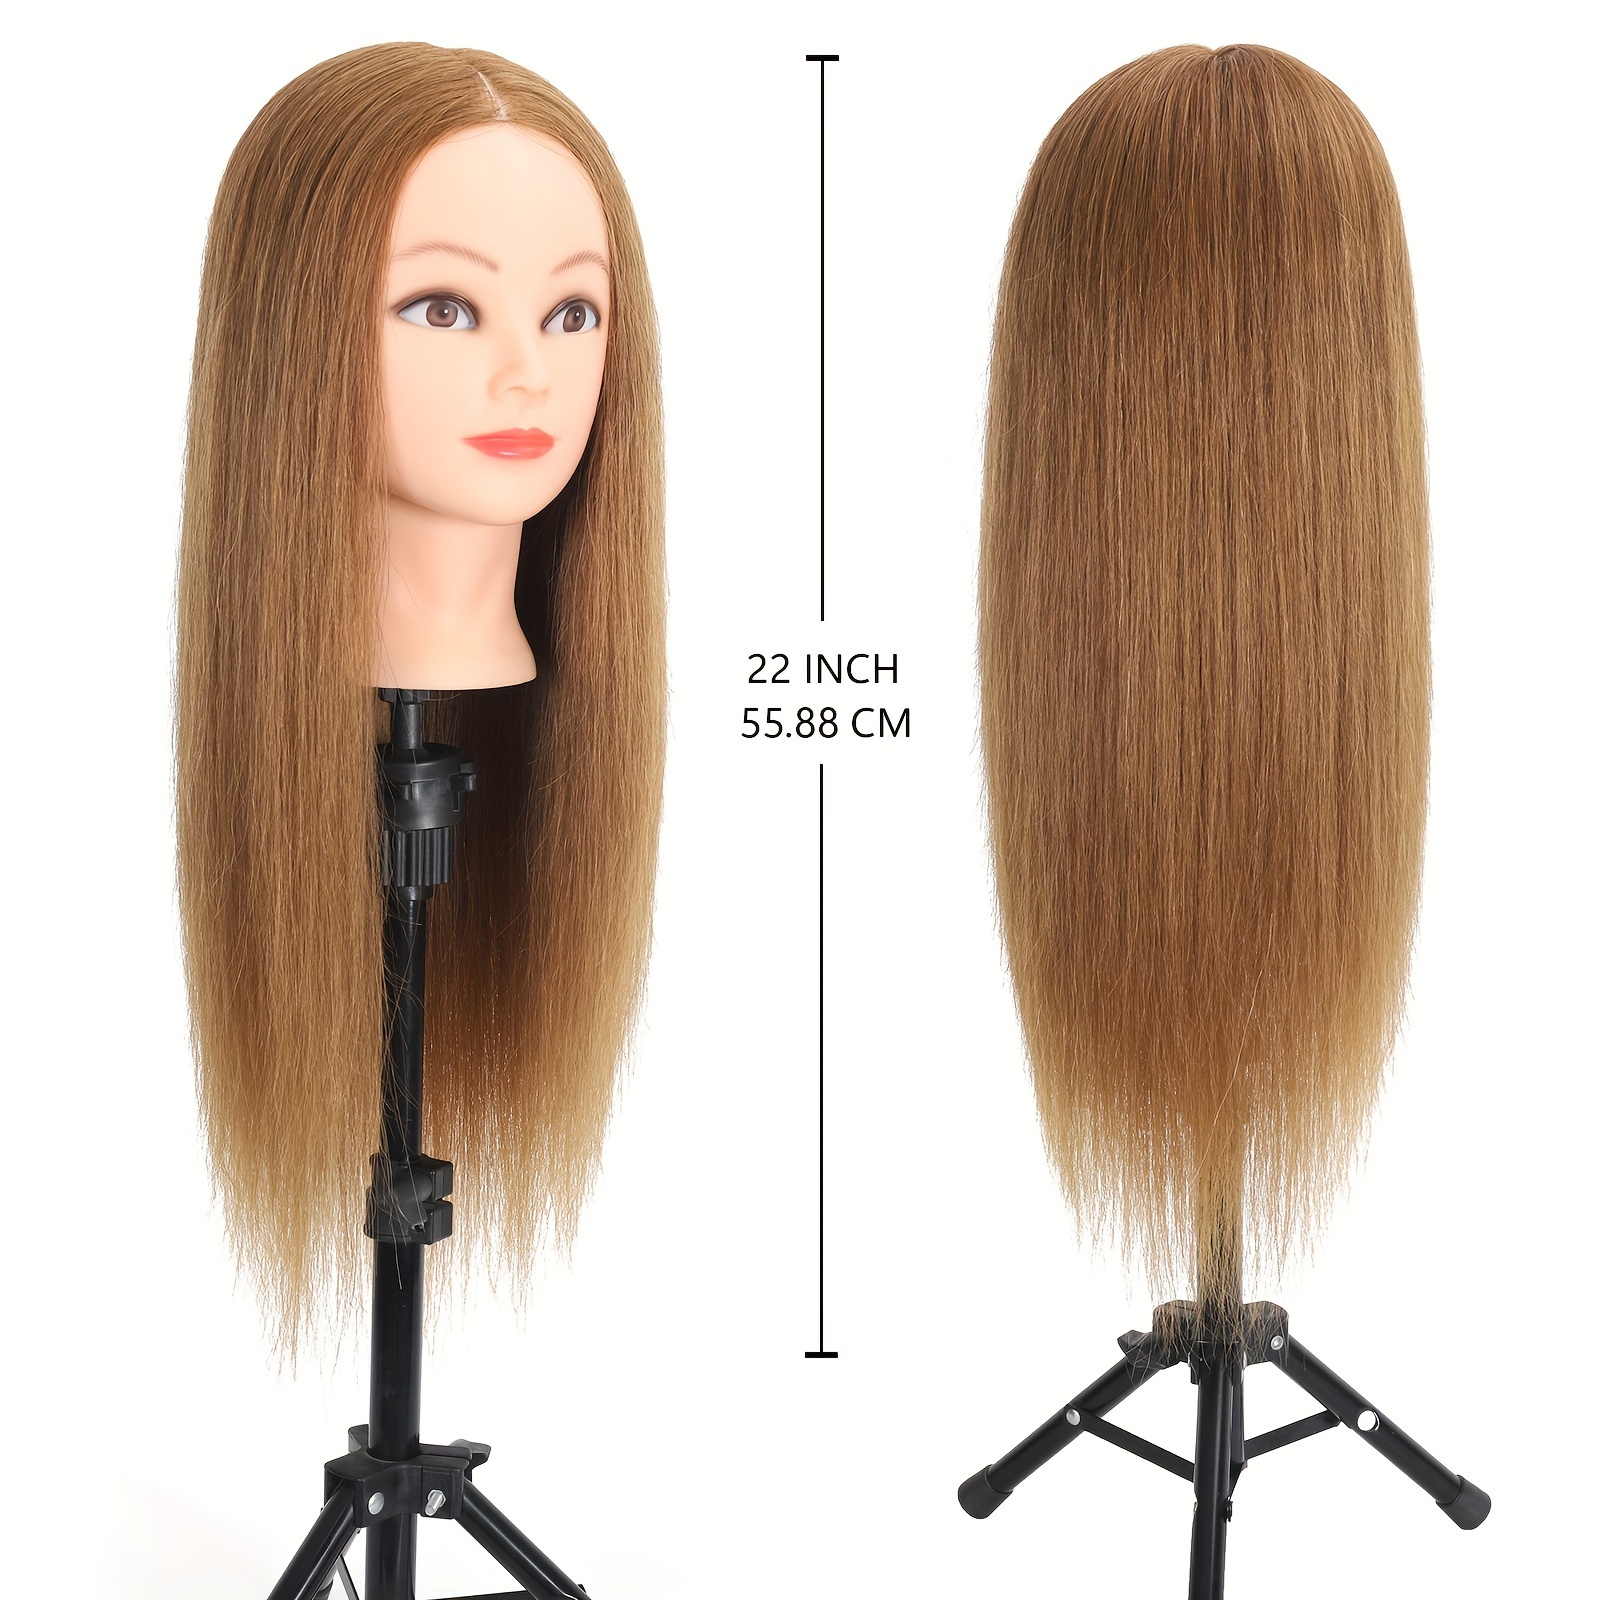 Mannequin Head with Human Hair for Braiding 100% Real Hair Mannequin Head Cosmetology with Hair Doll Head for Hair Styling Free Table Mannequin